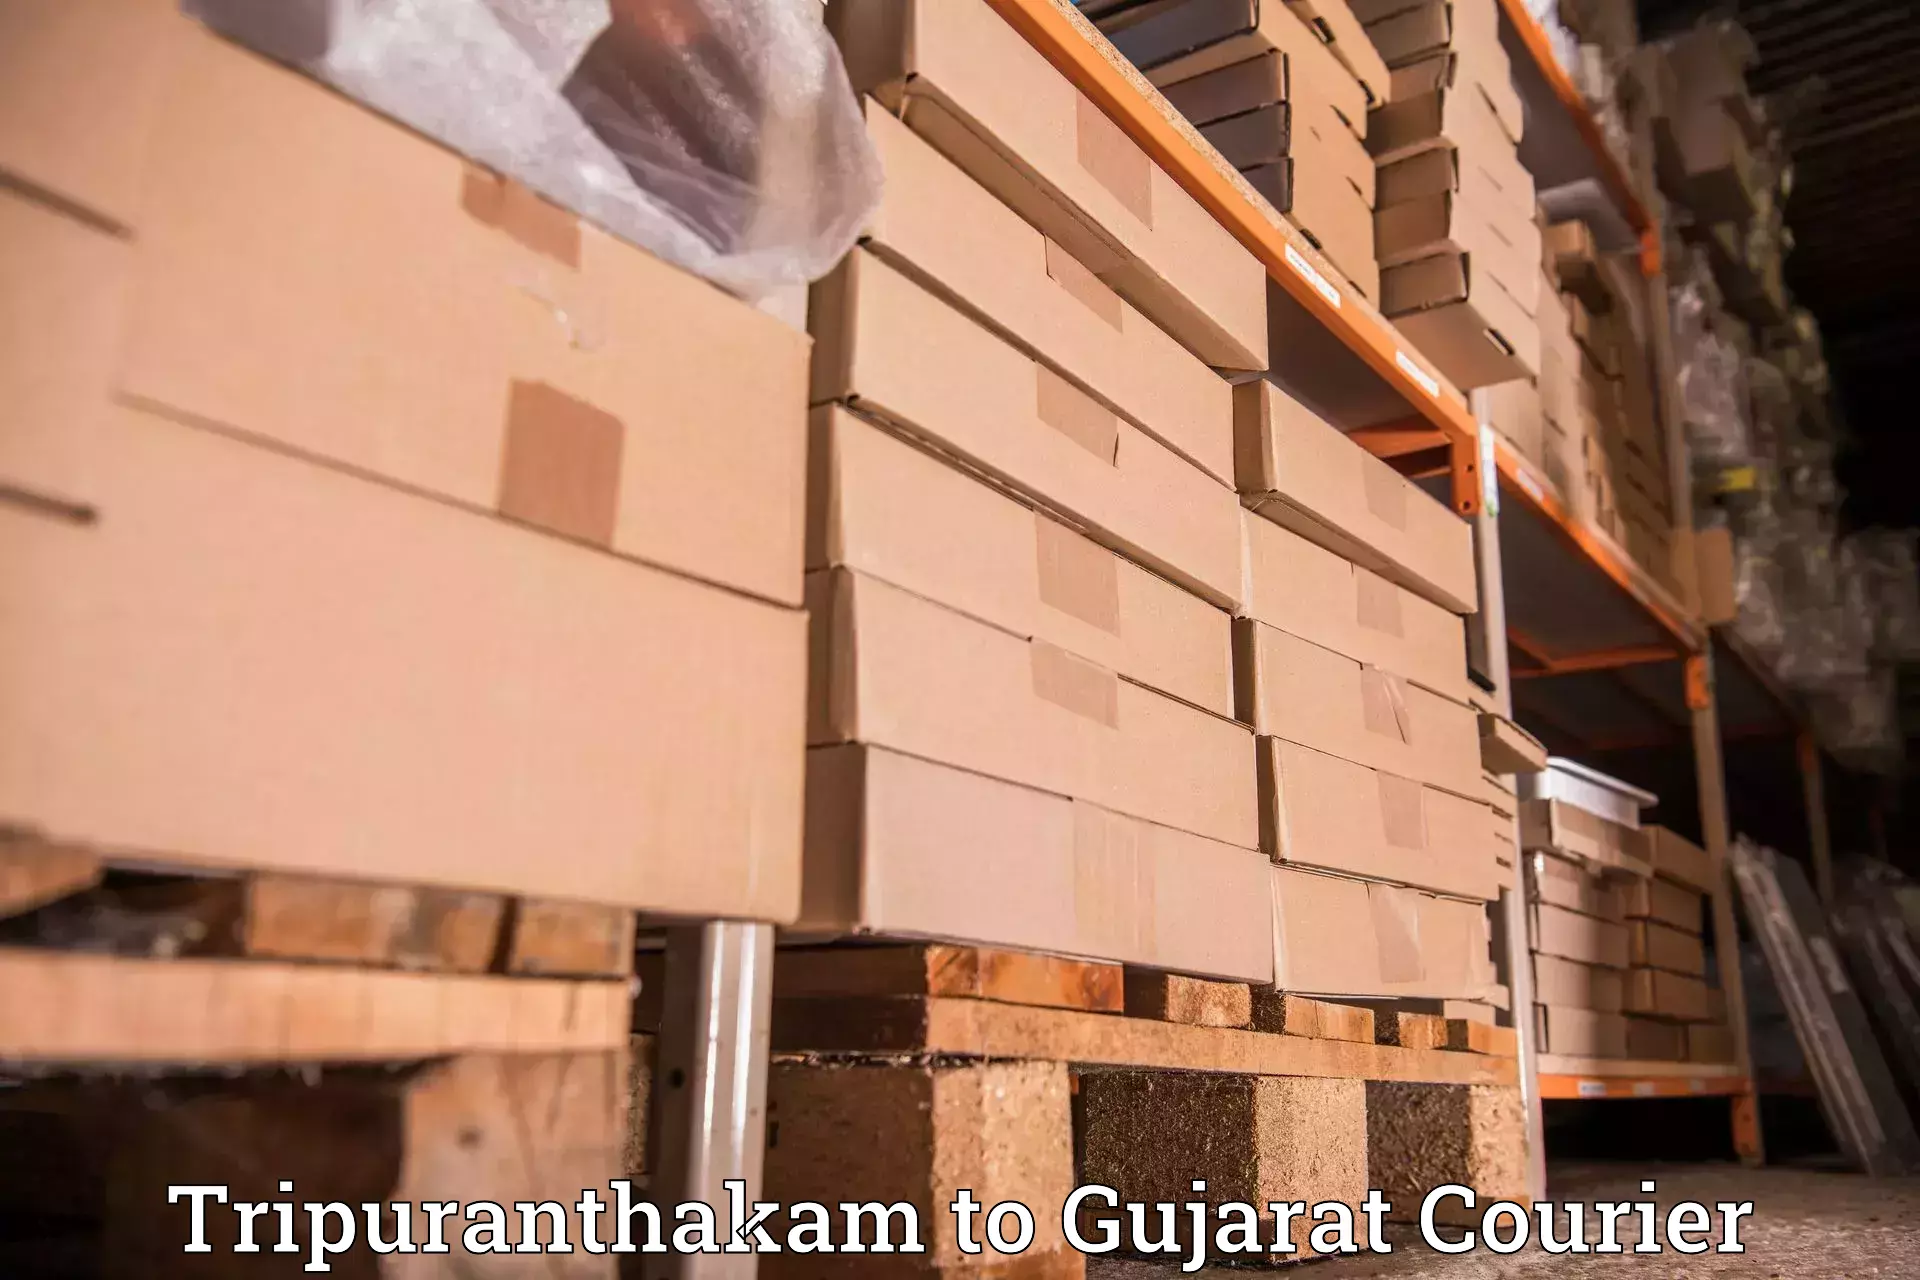 State-of-the-art courier technology Tripuranthakam to Dharmasala